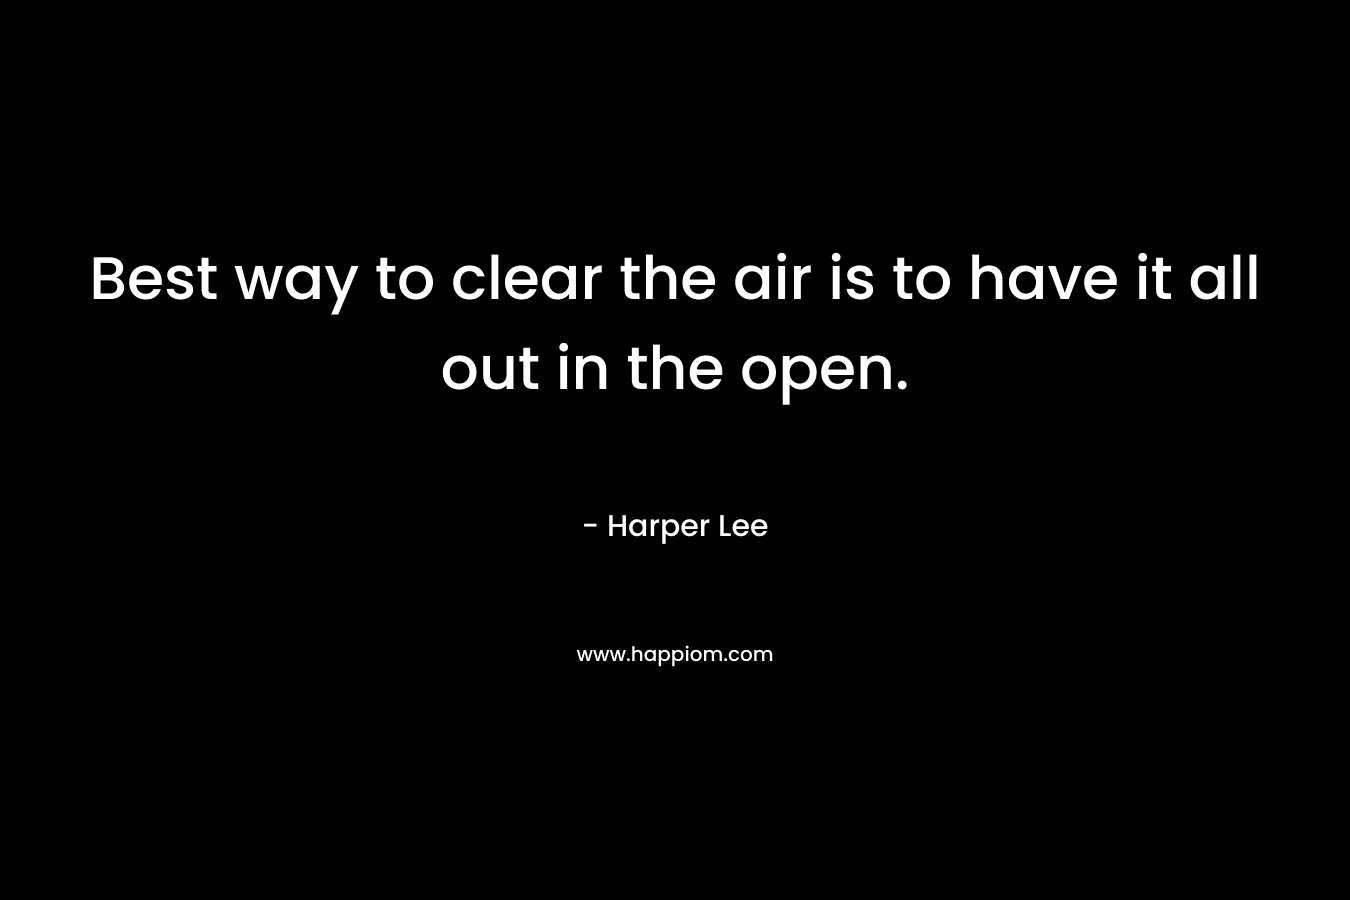 Best way to clear the air is to have it all out in the open.